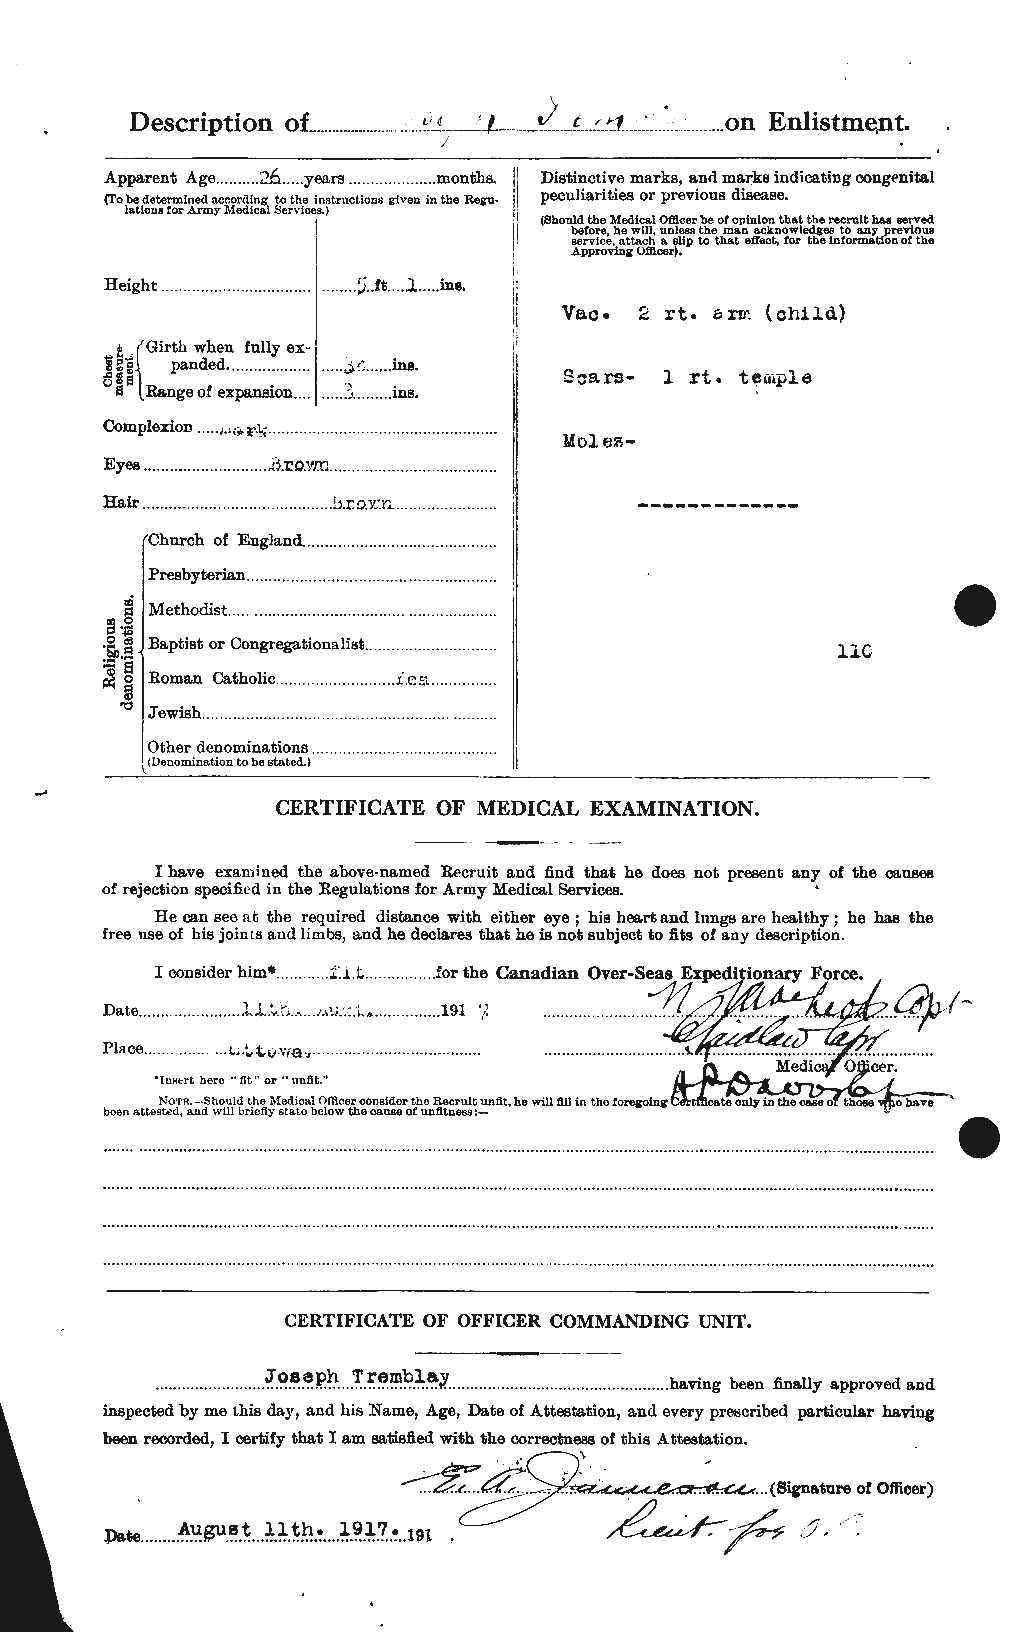 Personnel Records of the First World War - CEF 639133b